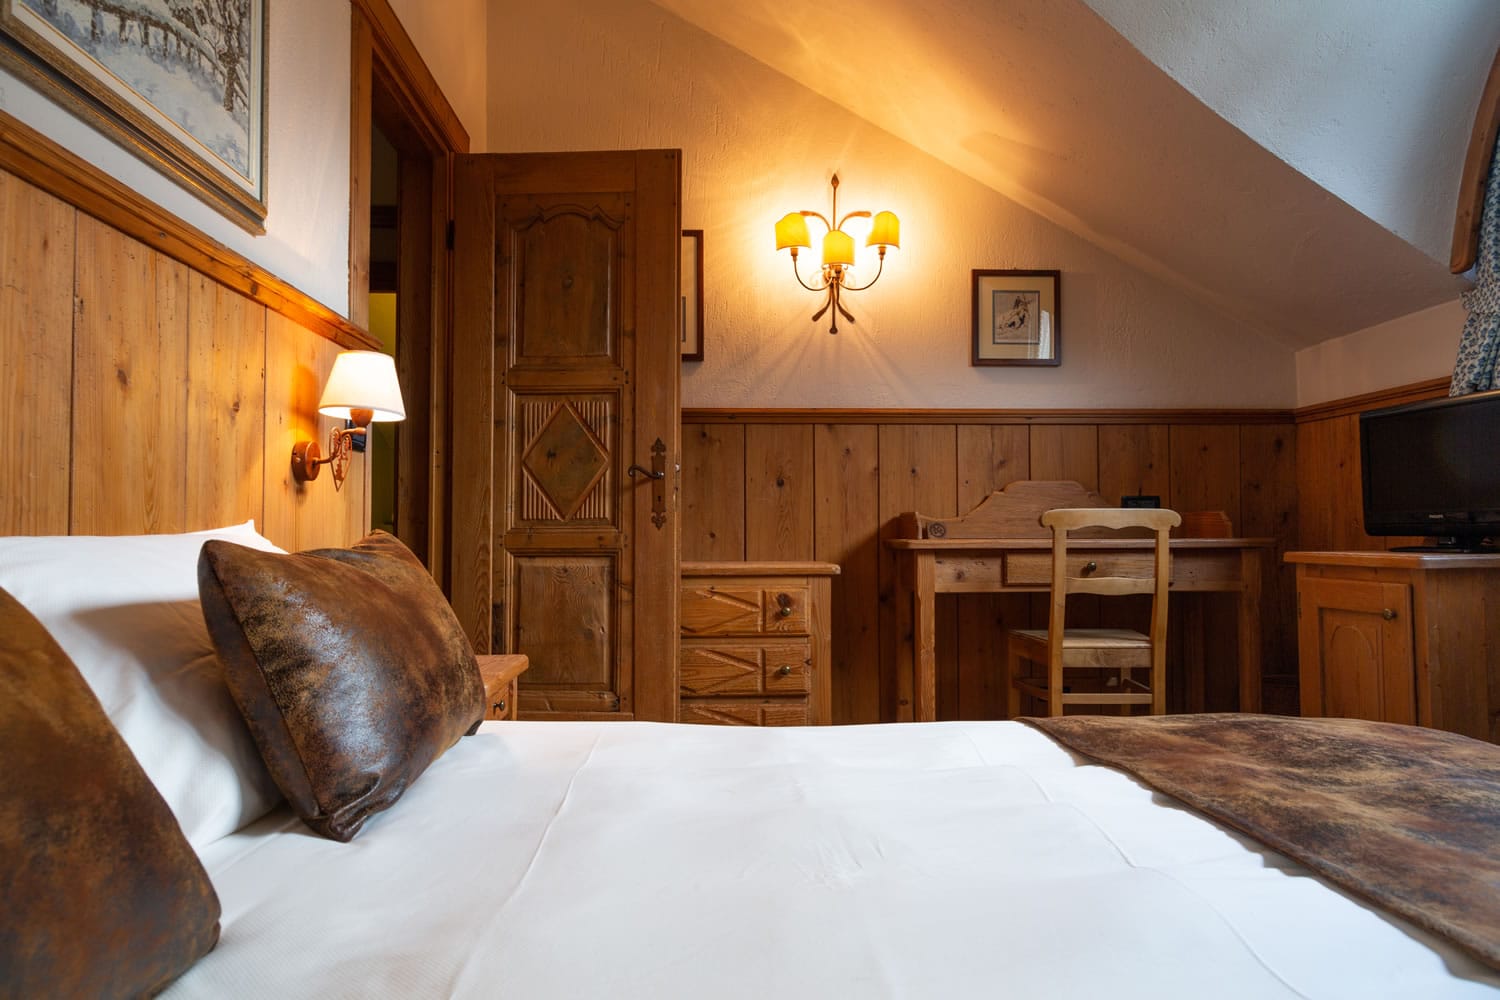 Hotel Bouton d'Or - Rooms